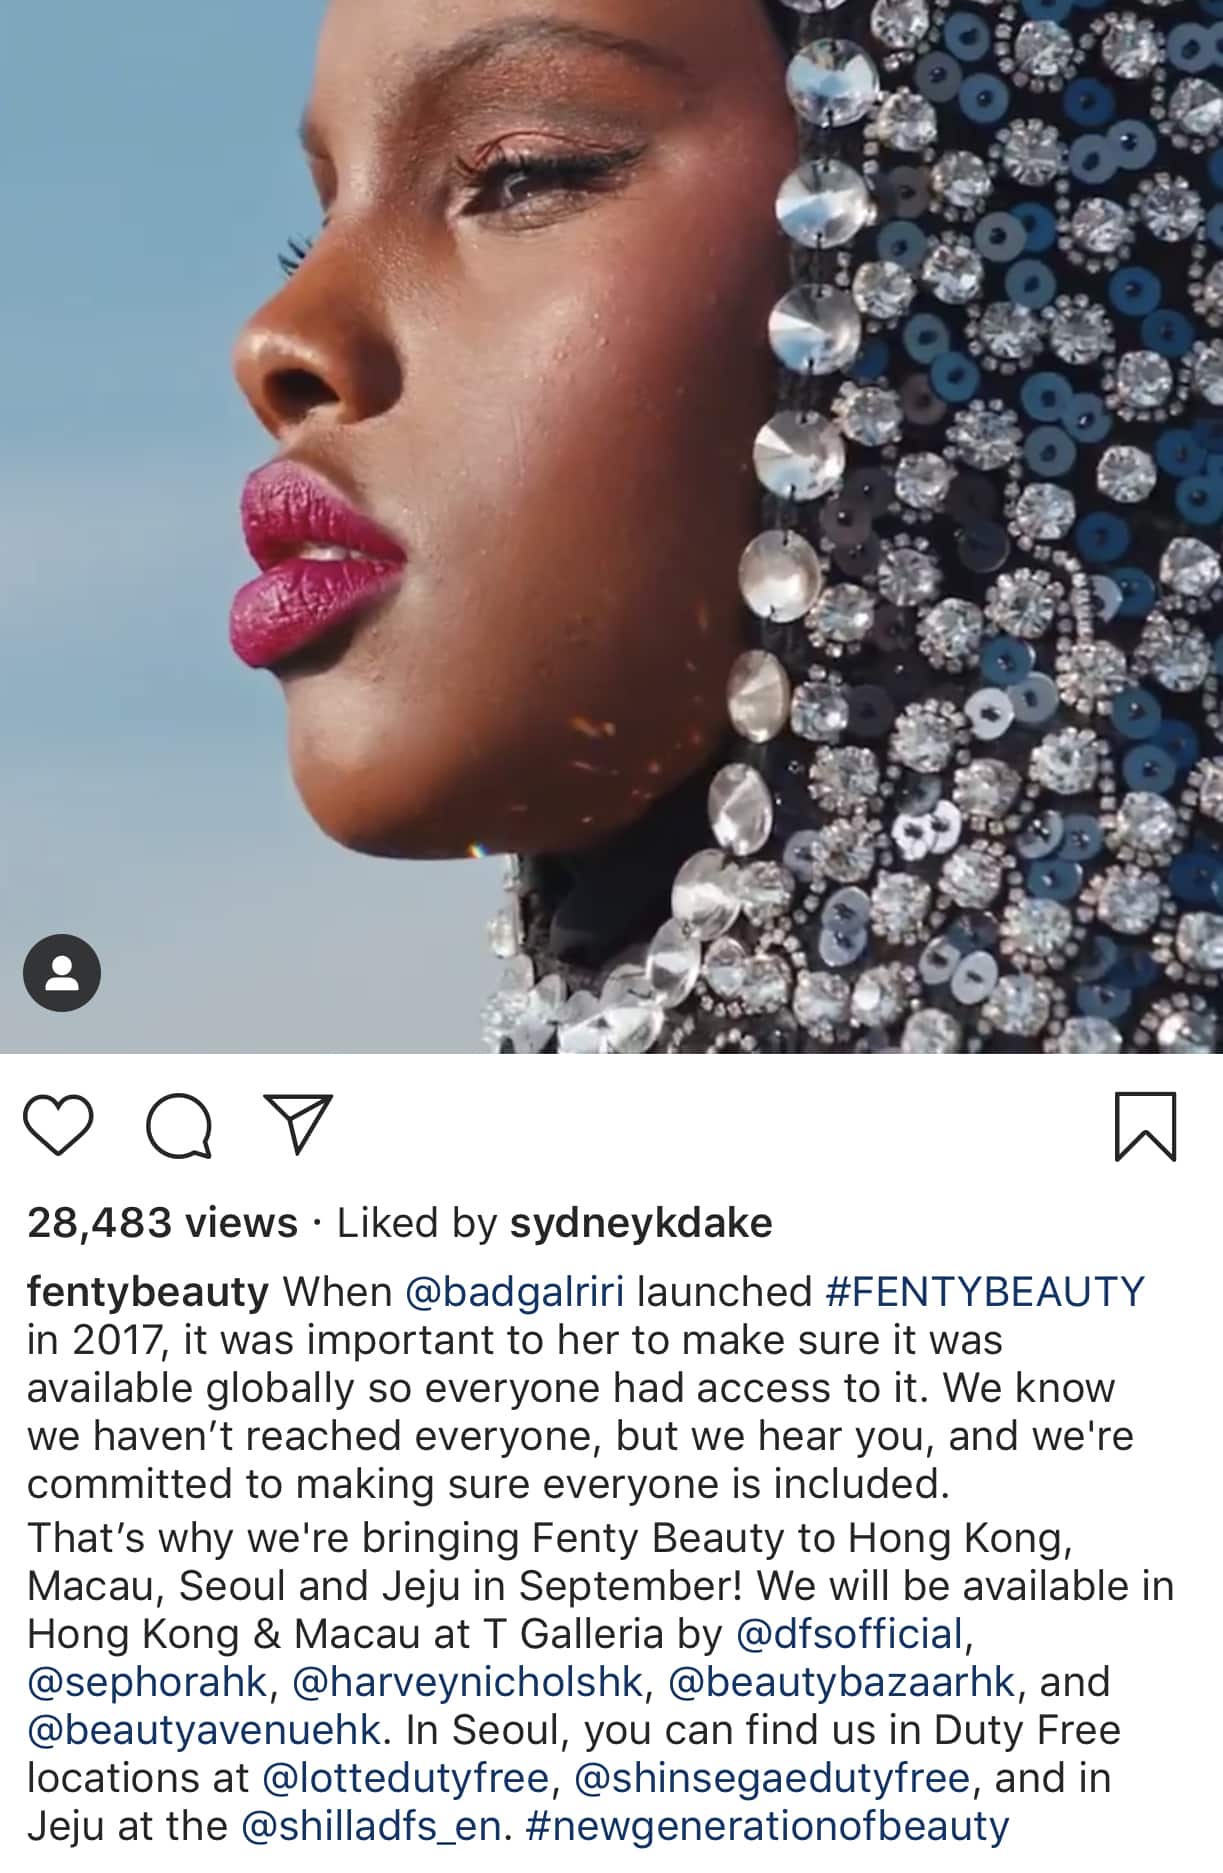 Is Fenty sold in China?